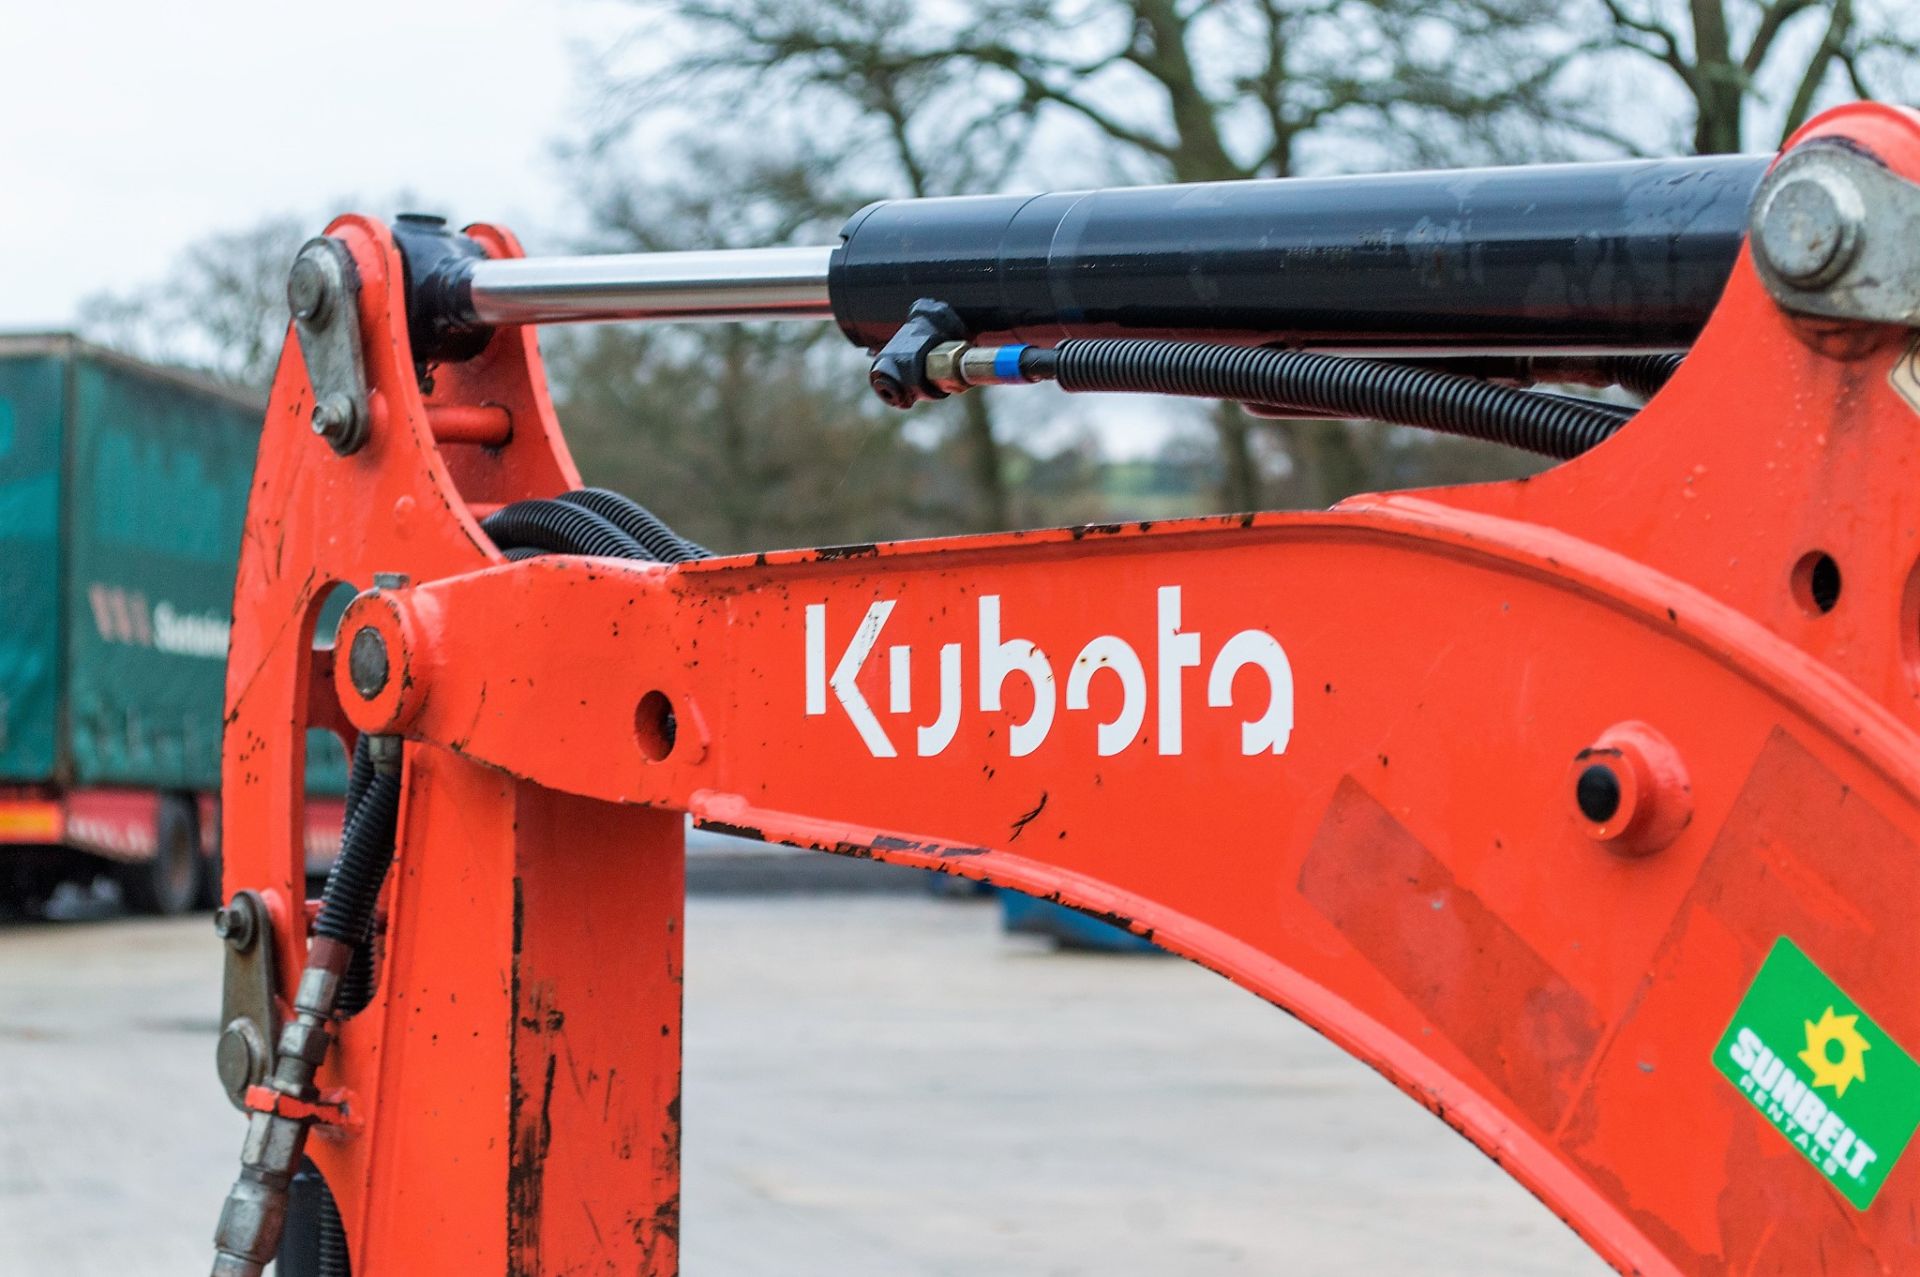 Kubota KX016-4 1.5 tonne rubber tracked excavator Year: 2014 S/N: 57529 Recorded Hours: 2638 - Image 12 of 23